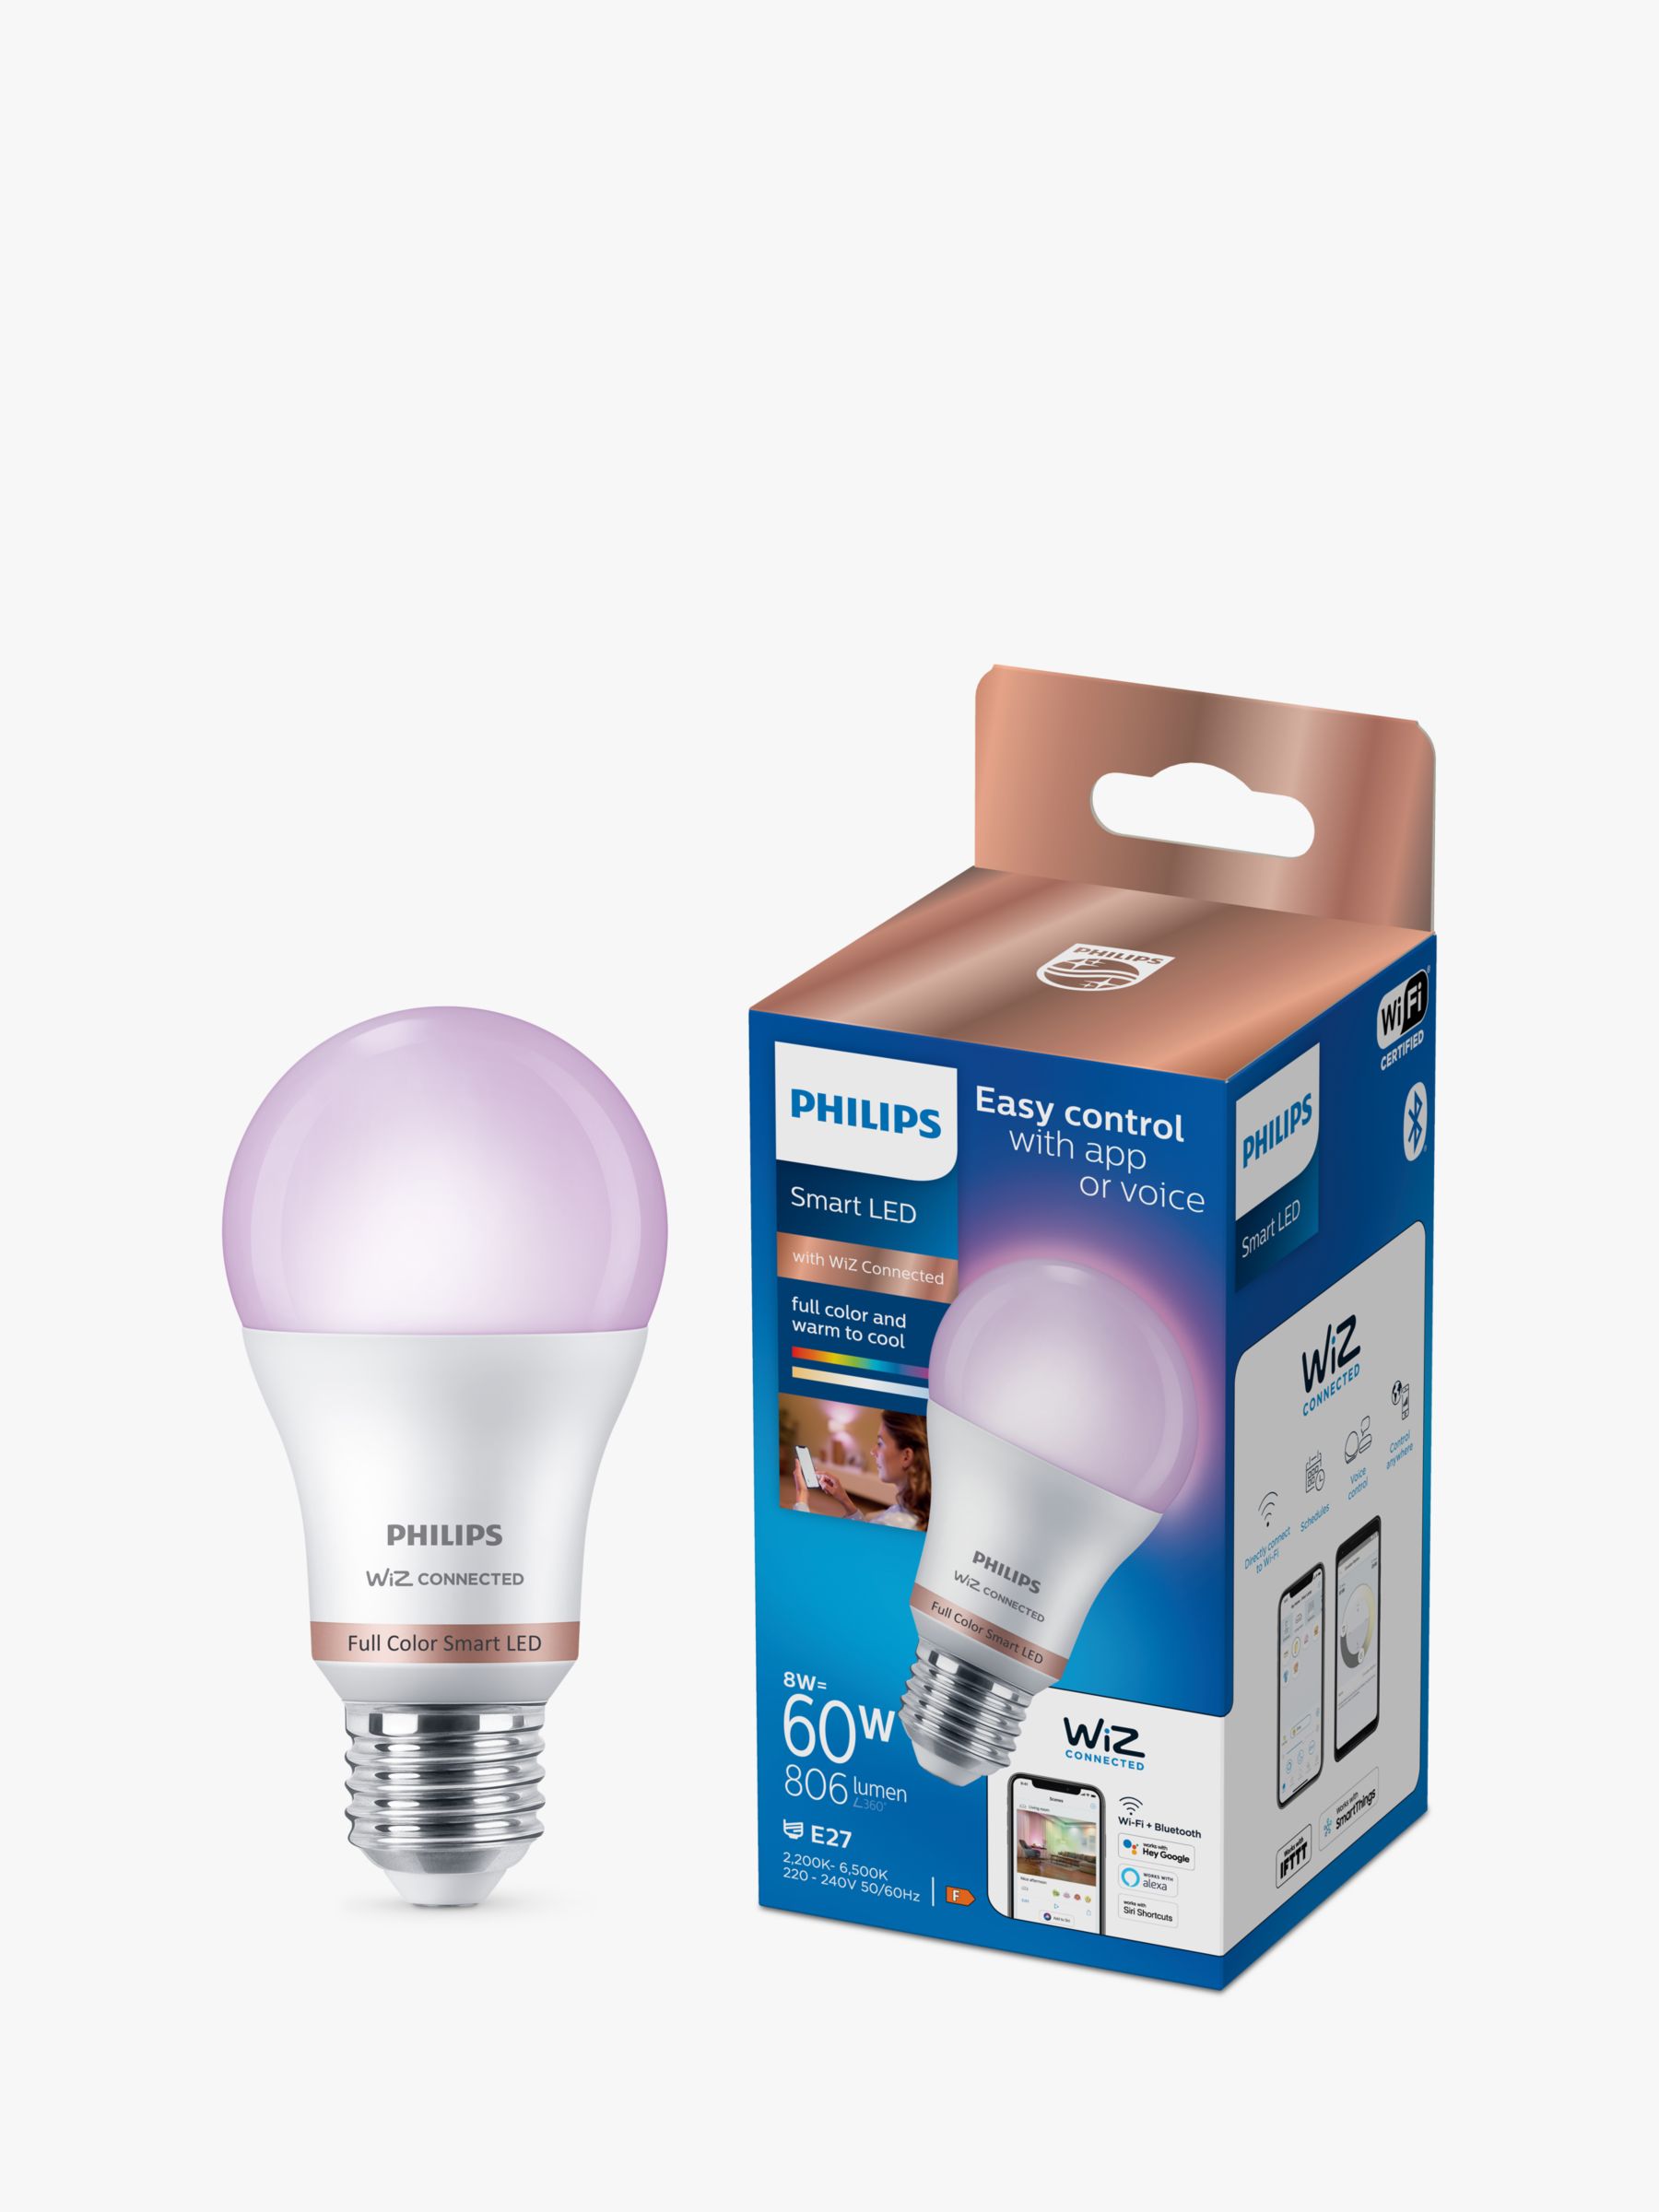 Philips Smart LED 8W E27 Dimmable Full Colour and Bulb with WiZ Connected Bluetooth,